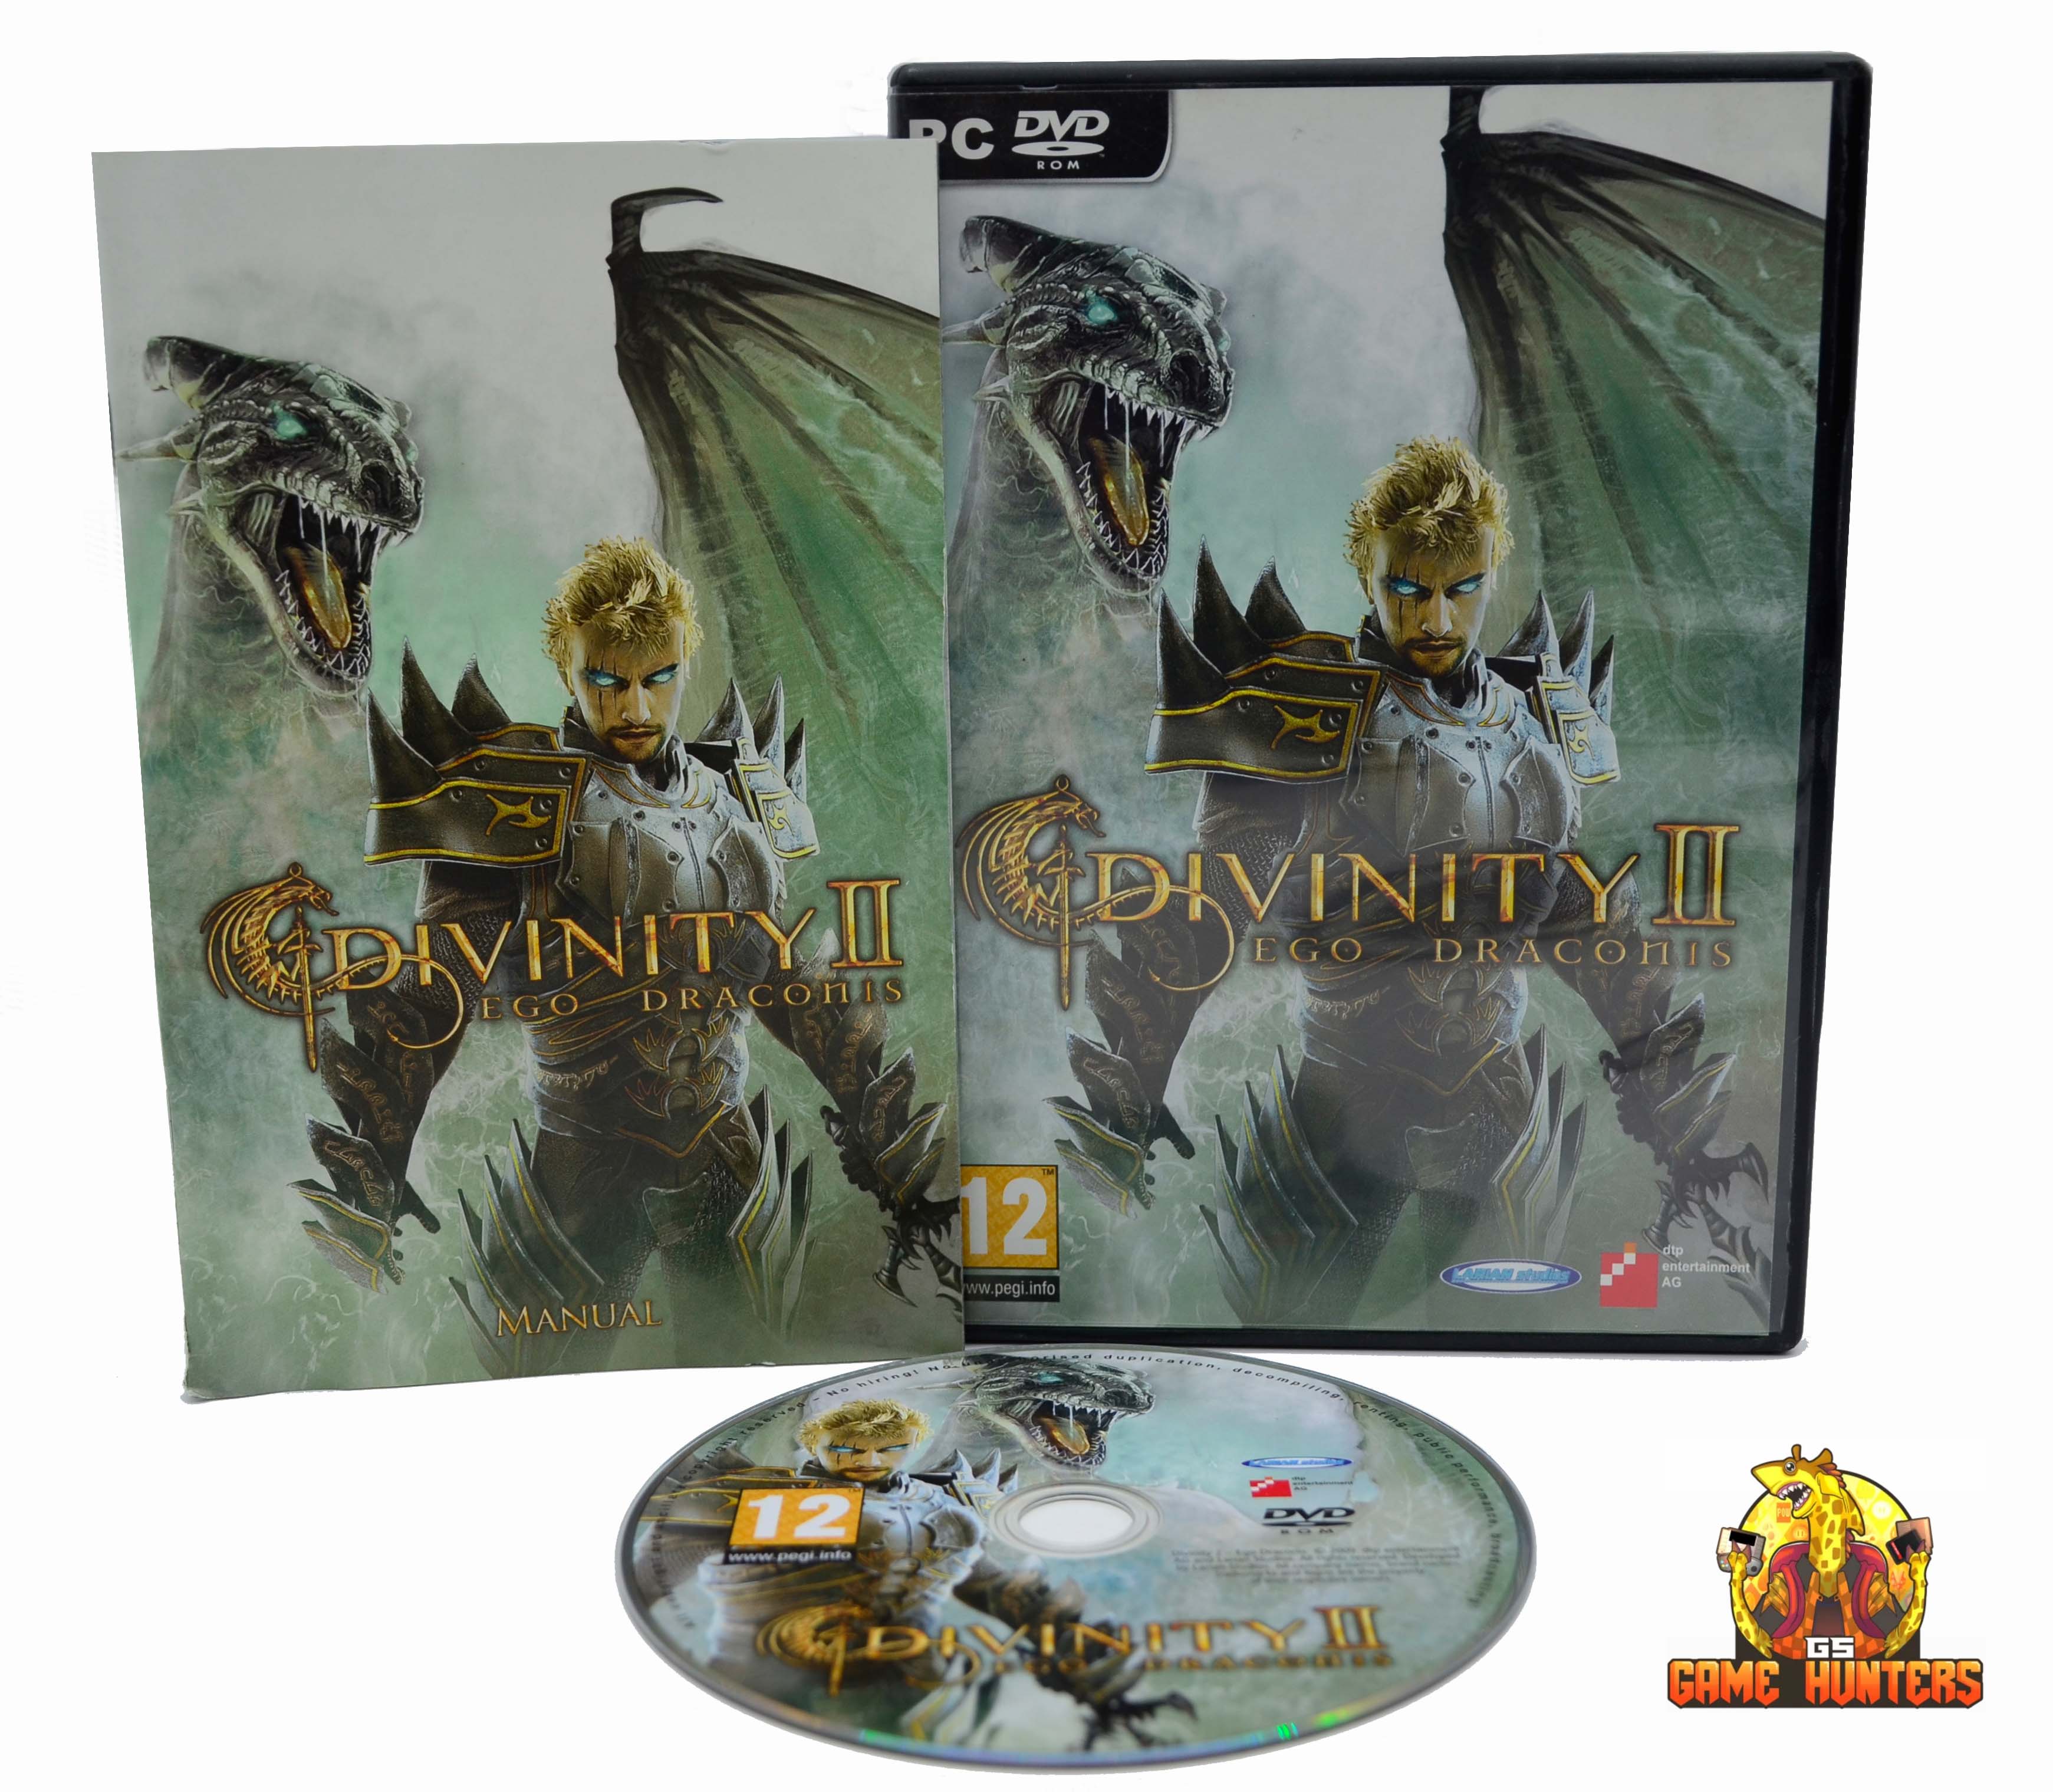 Divinity II Ego Draconis Case, Manual & Disc.jpg  by GSGAMEHUNTERS